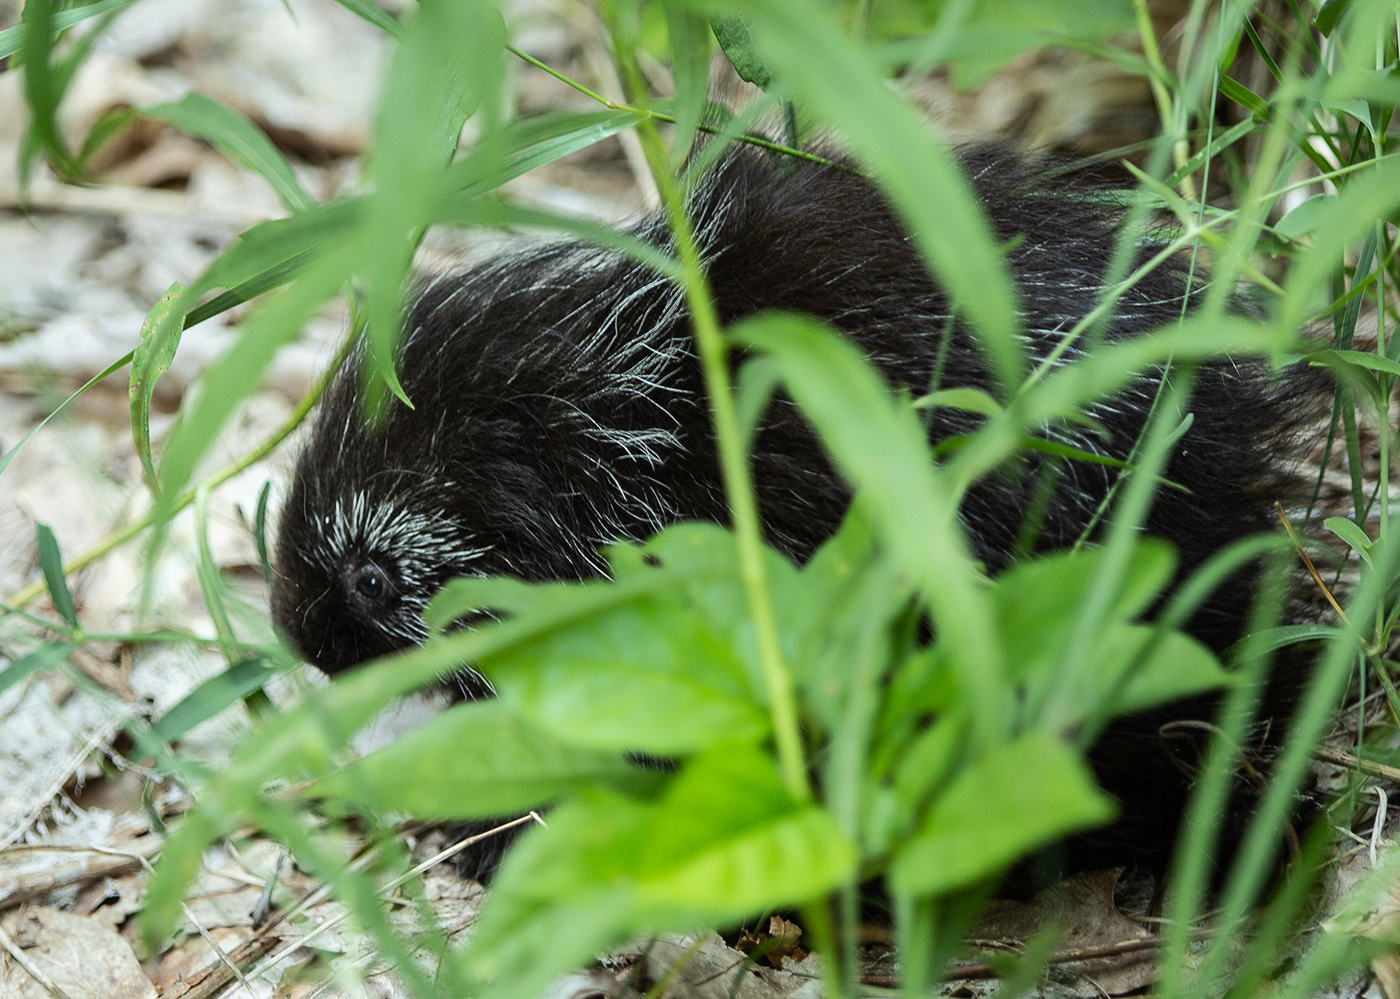 Closeup of a porcupine scurrying through the undergrowth of a forest.